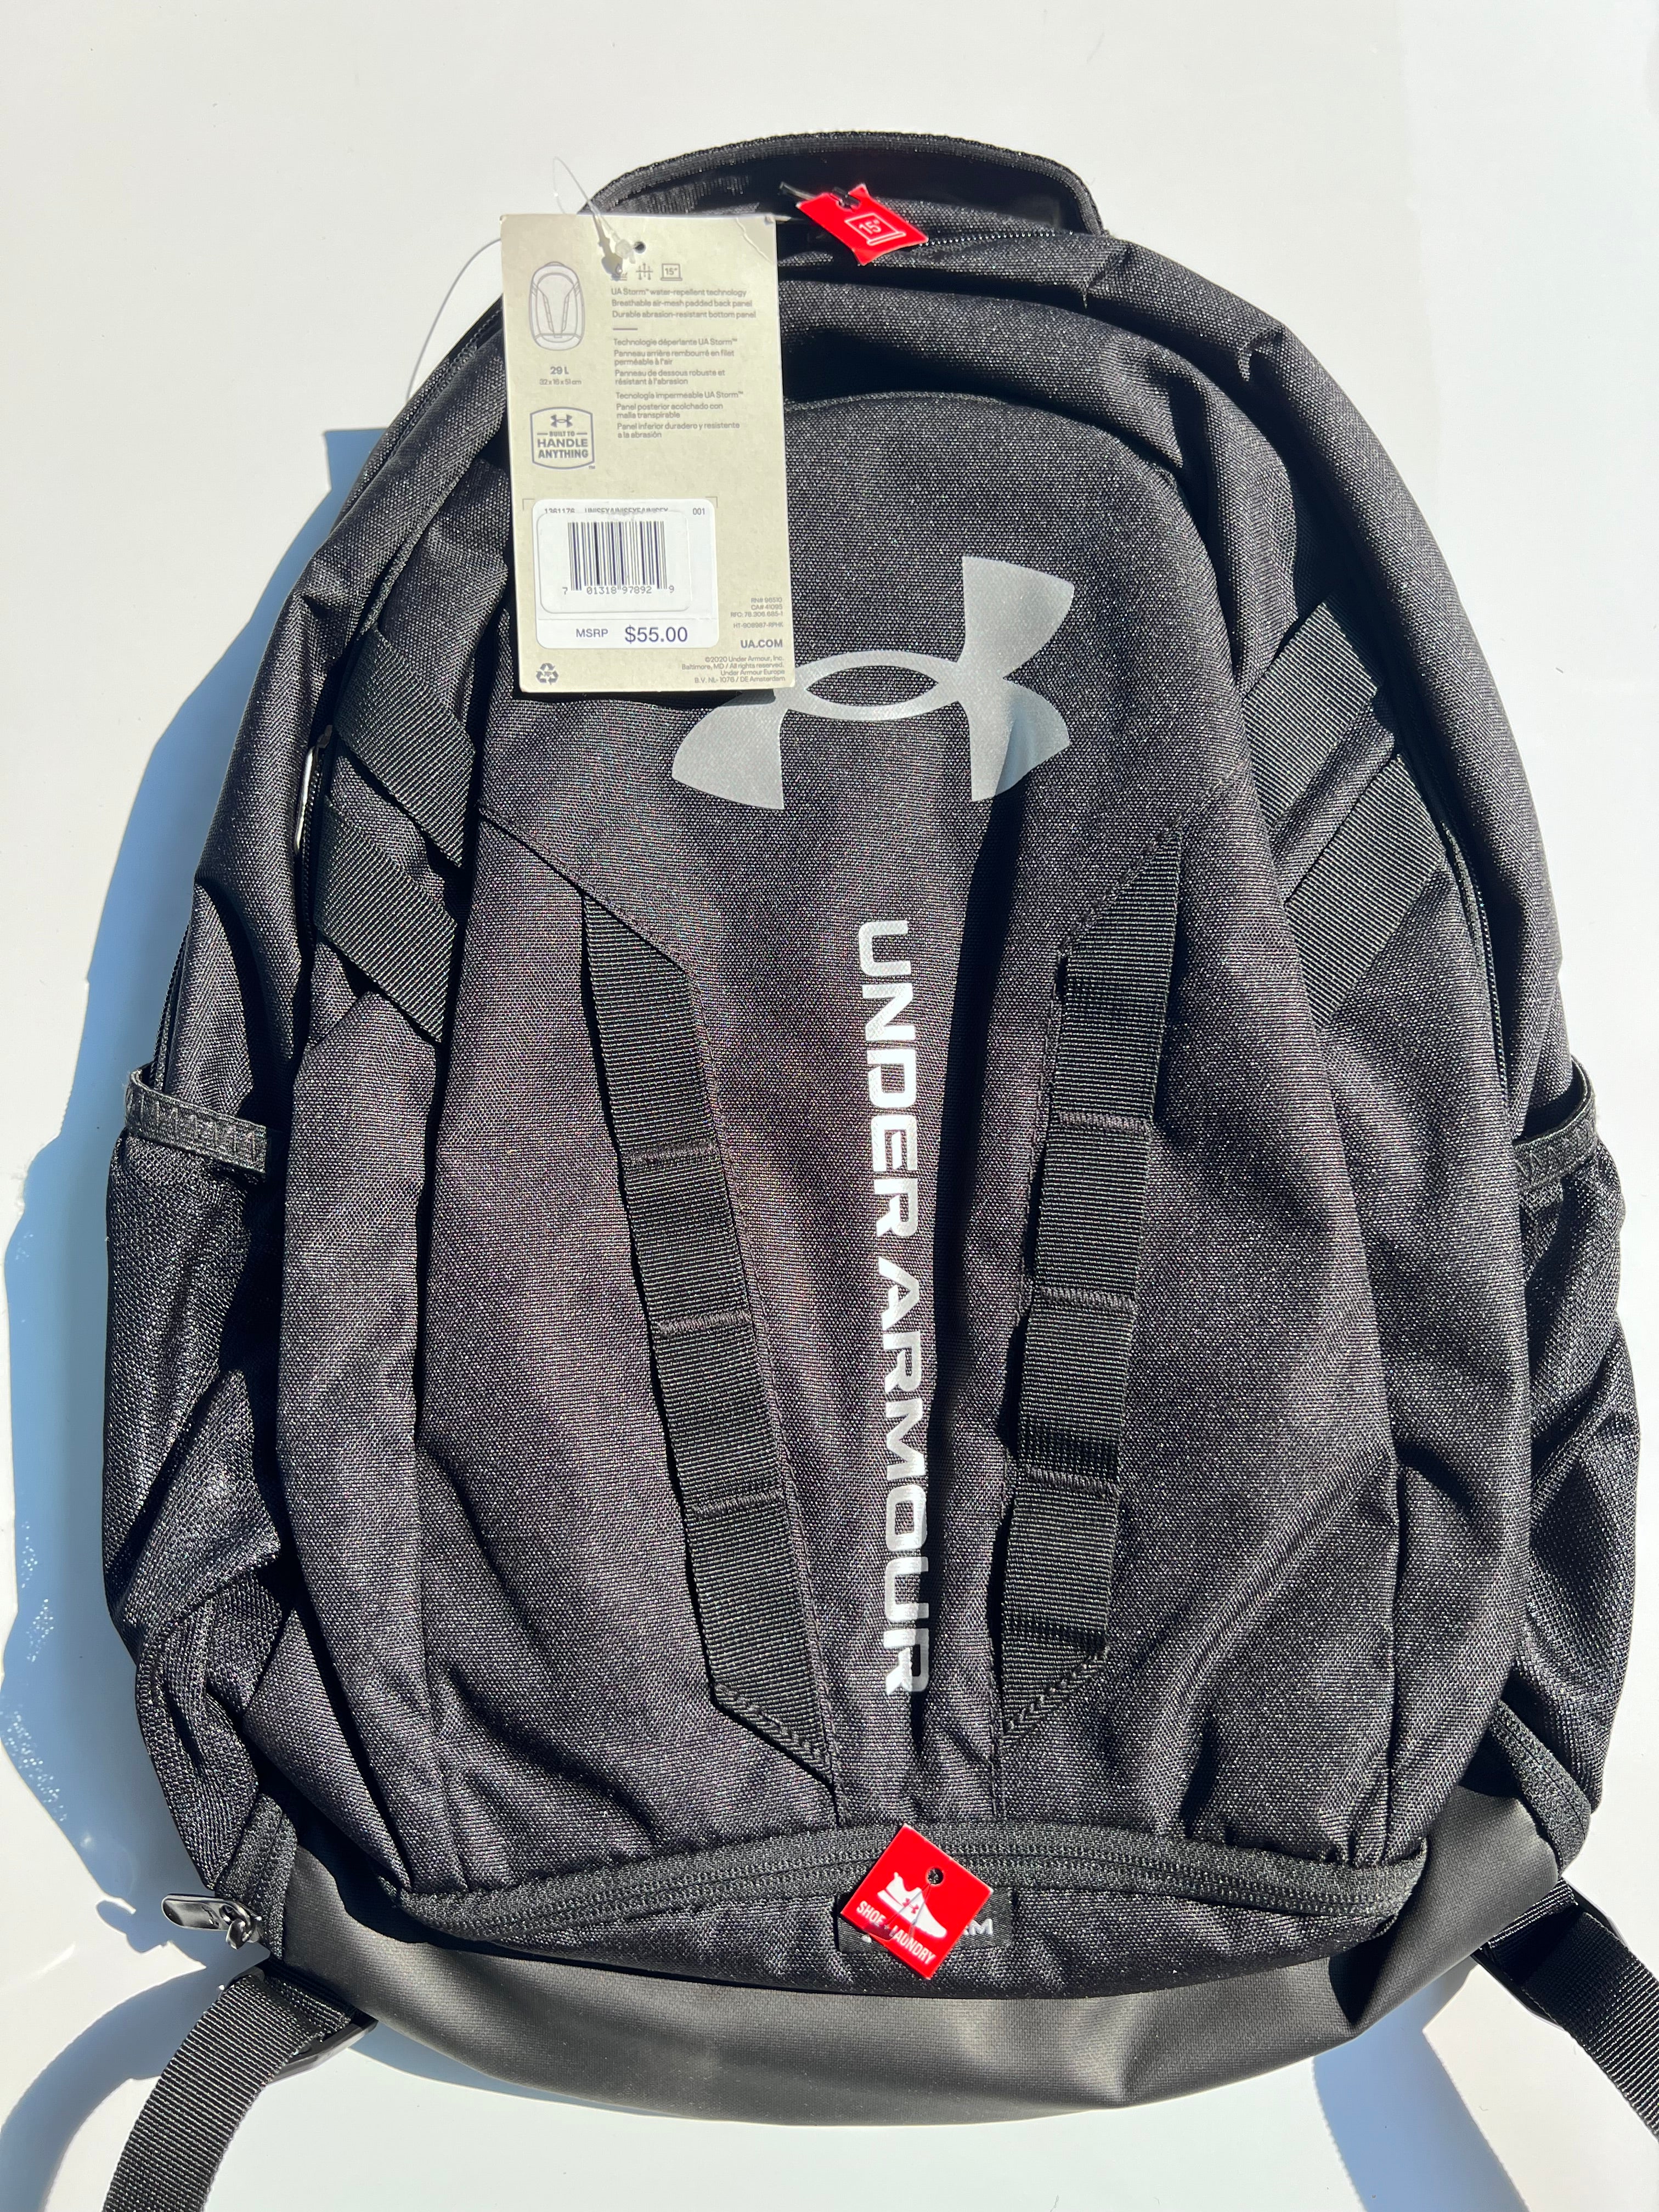 Under Armour Adult Hustle 5.0 Backpack , Black, One Size Fits All - Donated Goods & Services